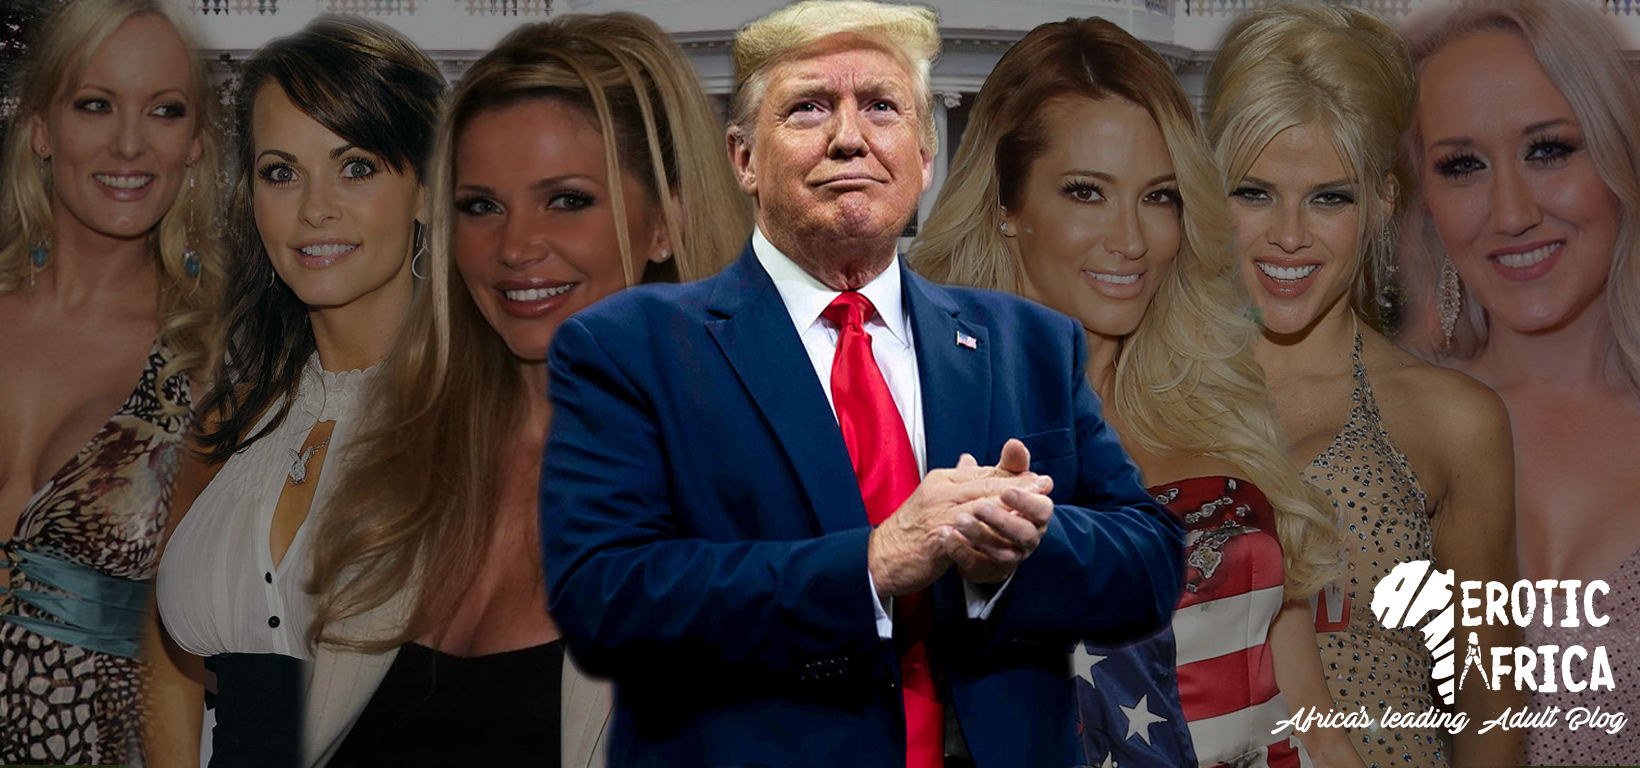 List of beautiful women who have had sex with Donald Trump